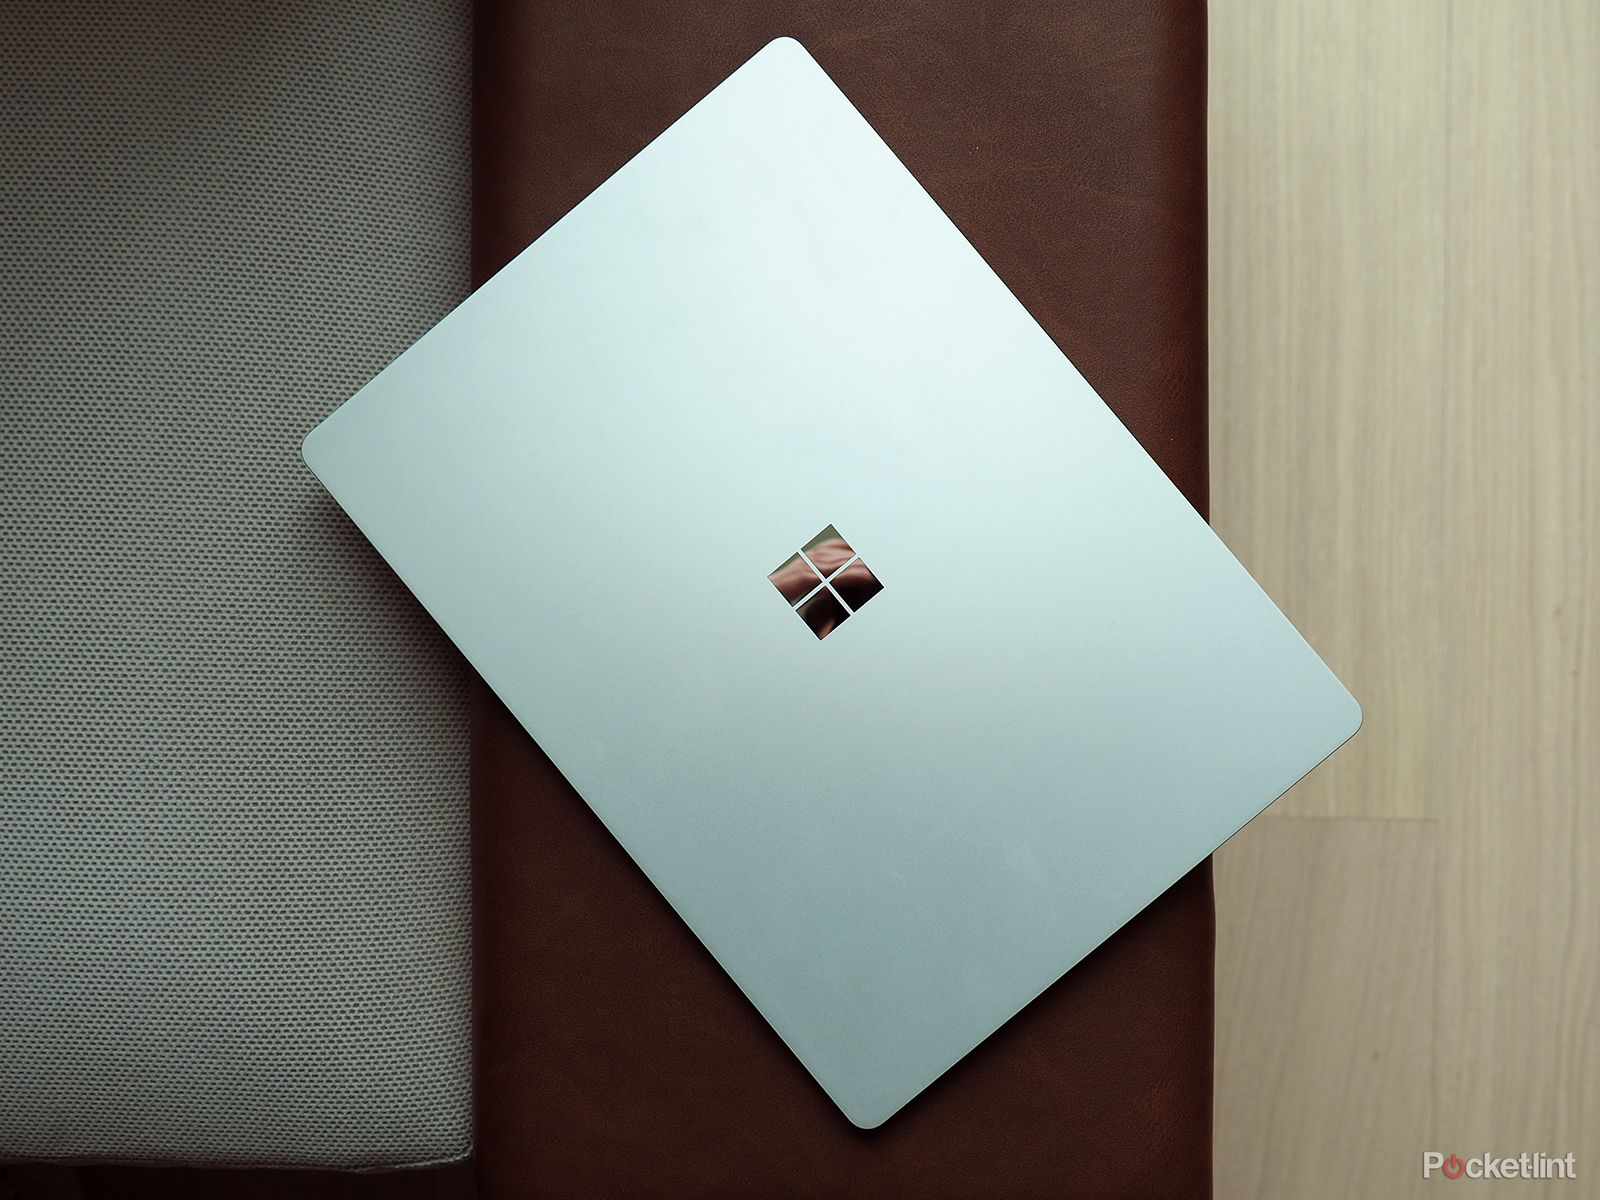 Trio of Microsoft Surface devices leaked including one with folding screen image 1